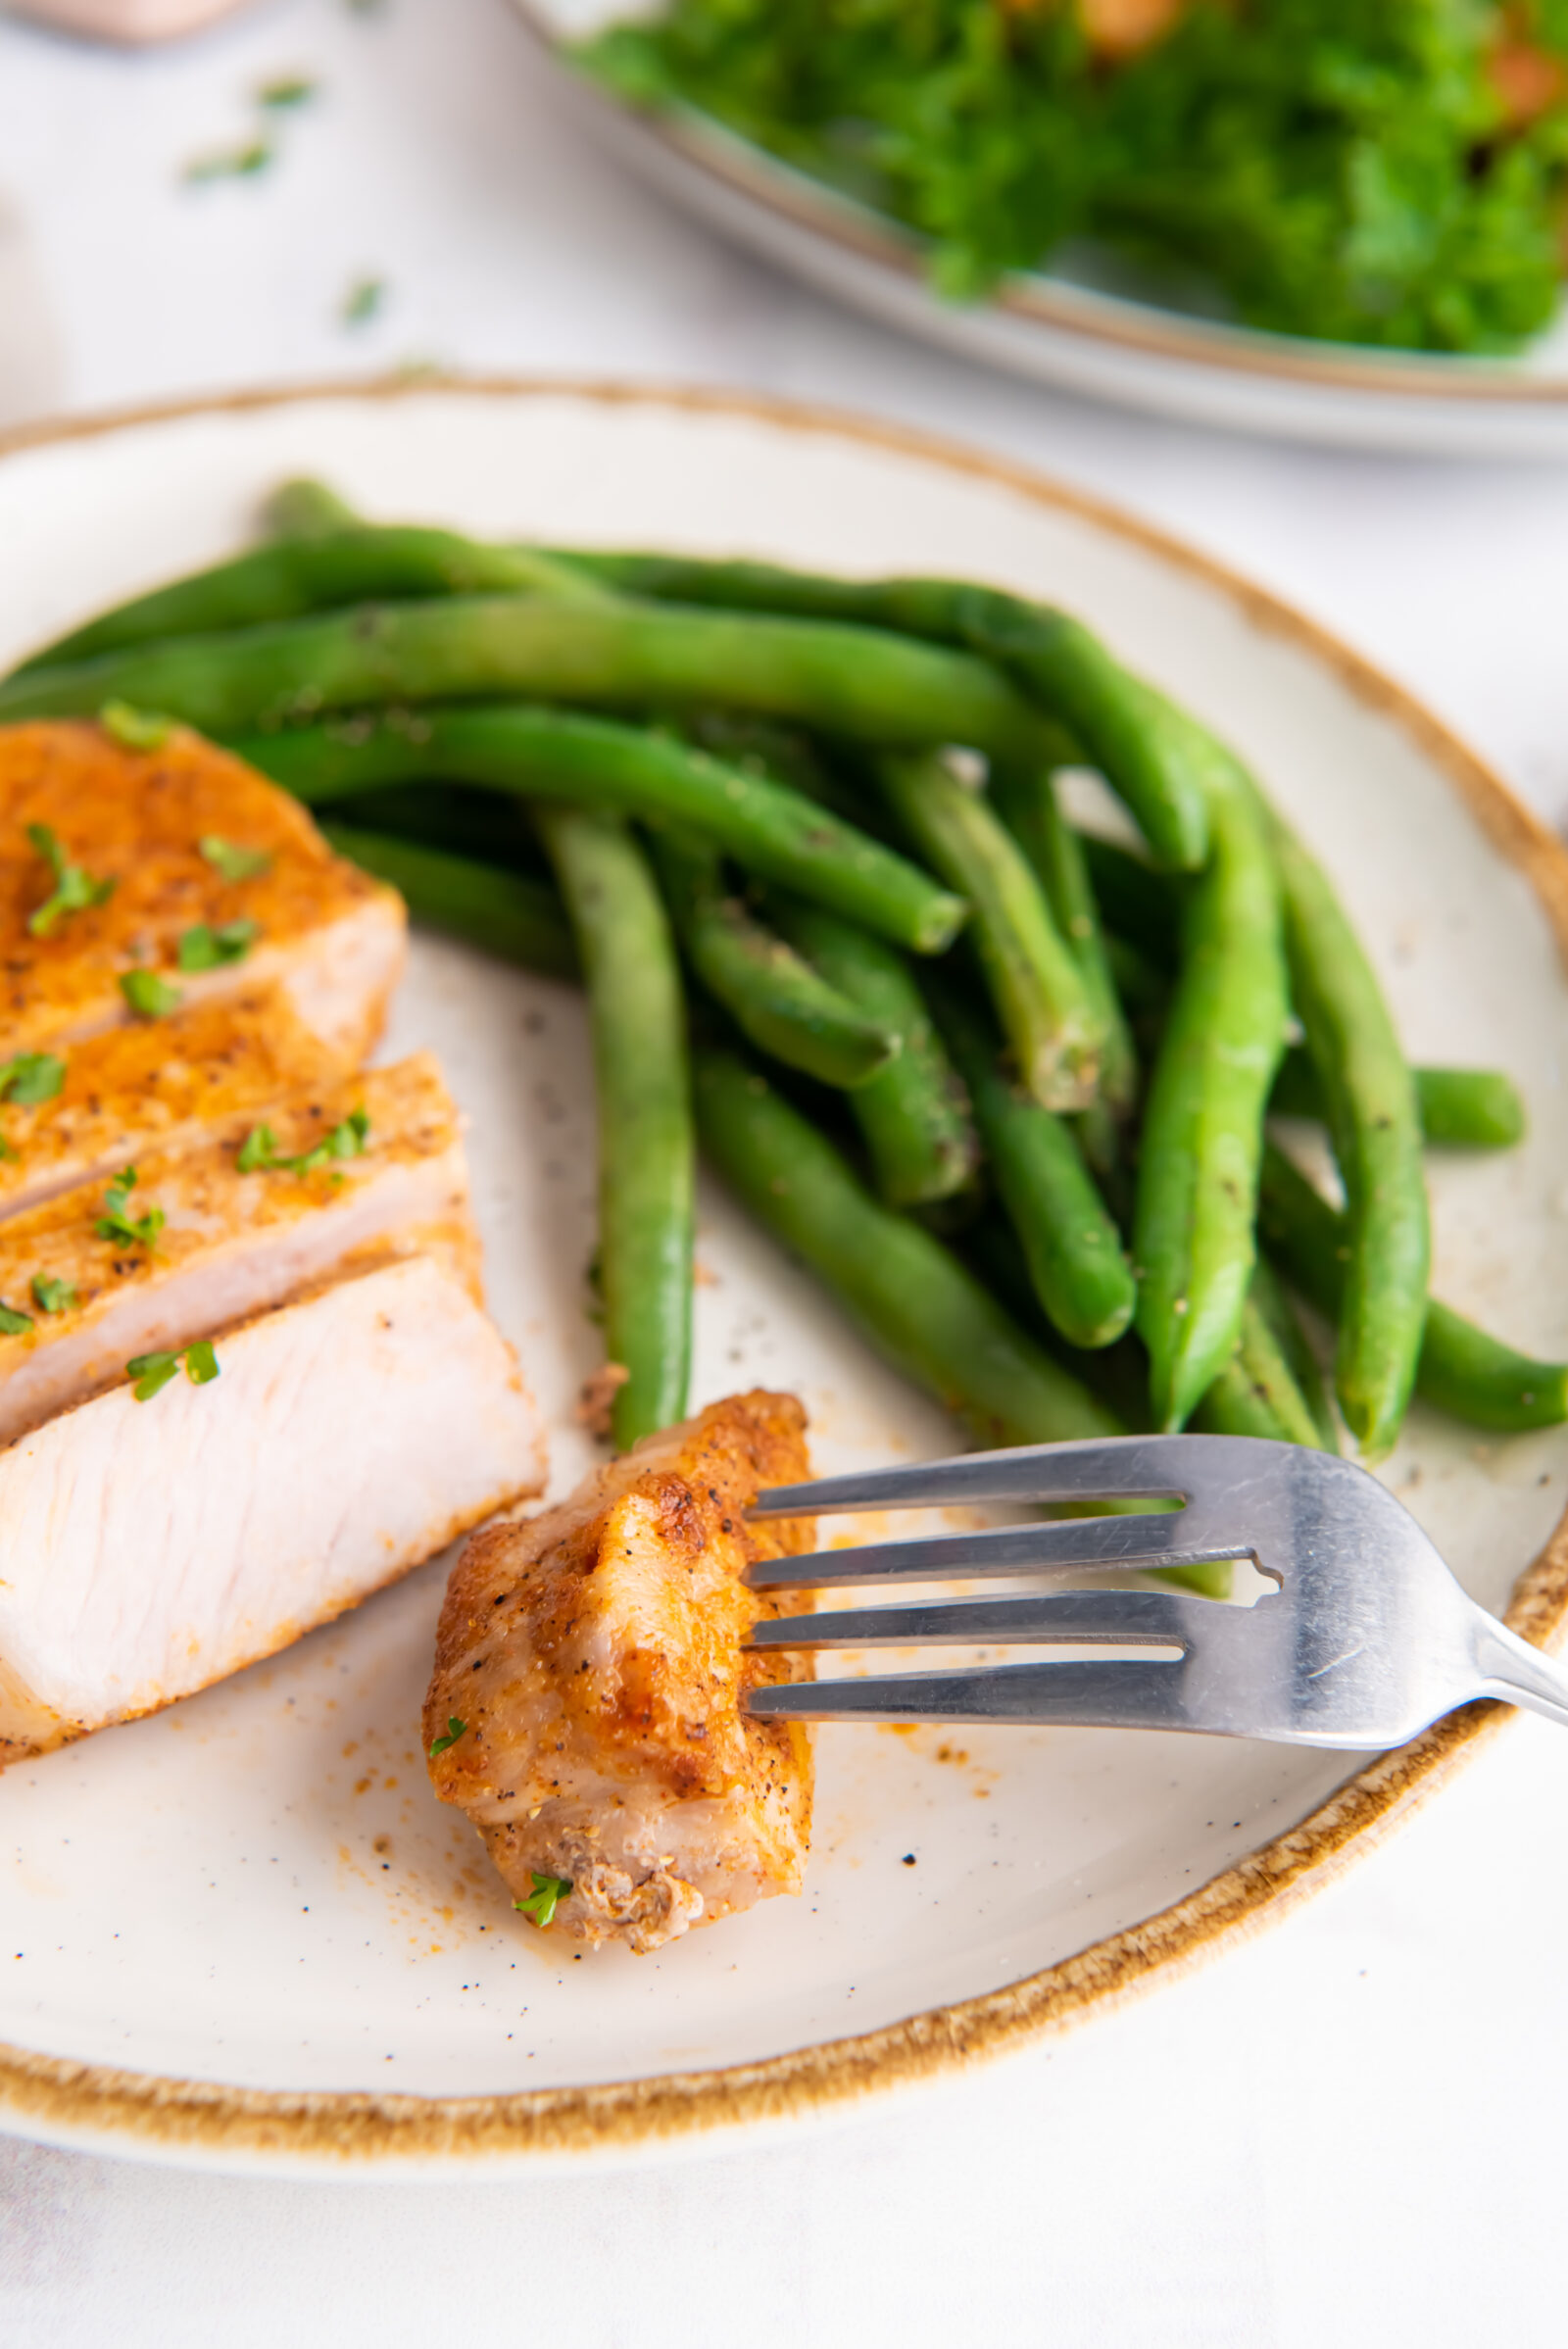 A sliced air fryer pork chop with green beans on a white speckled plate